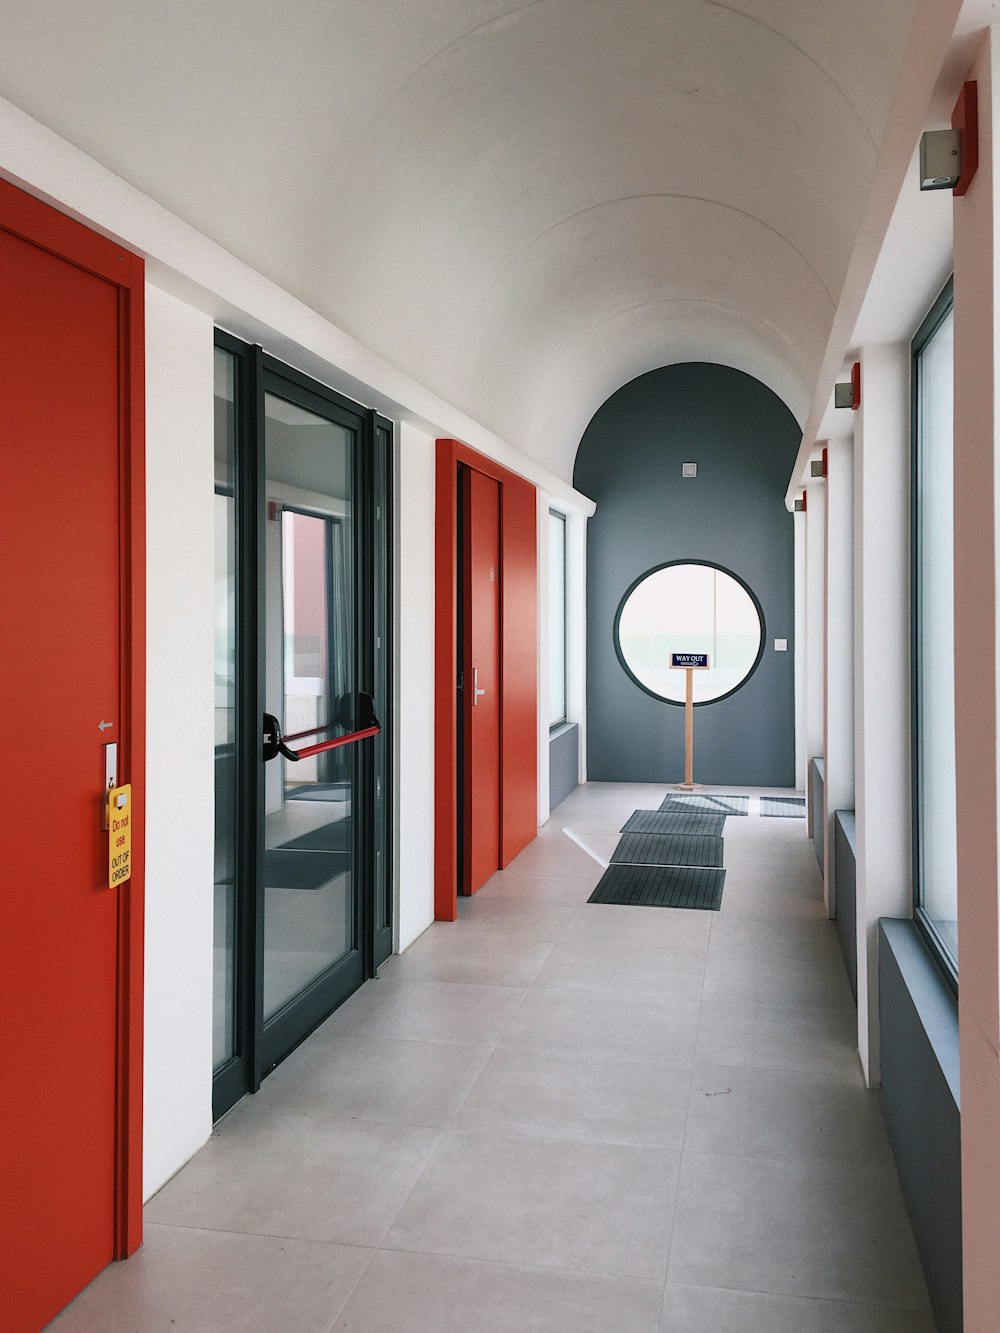 a hallway with red and white doors and a round window